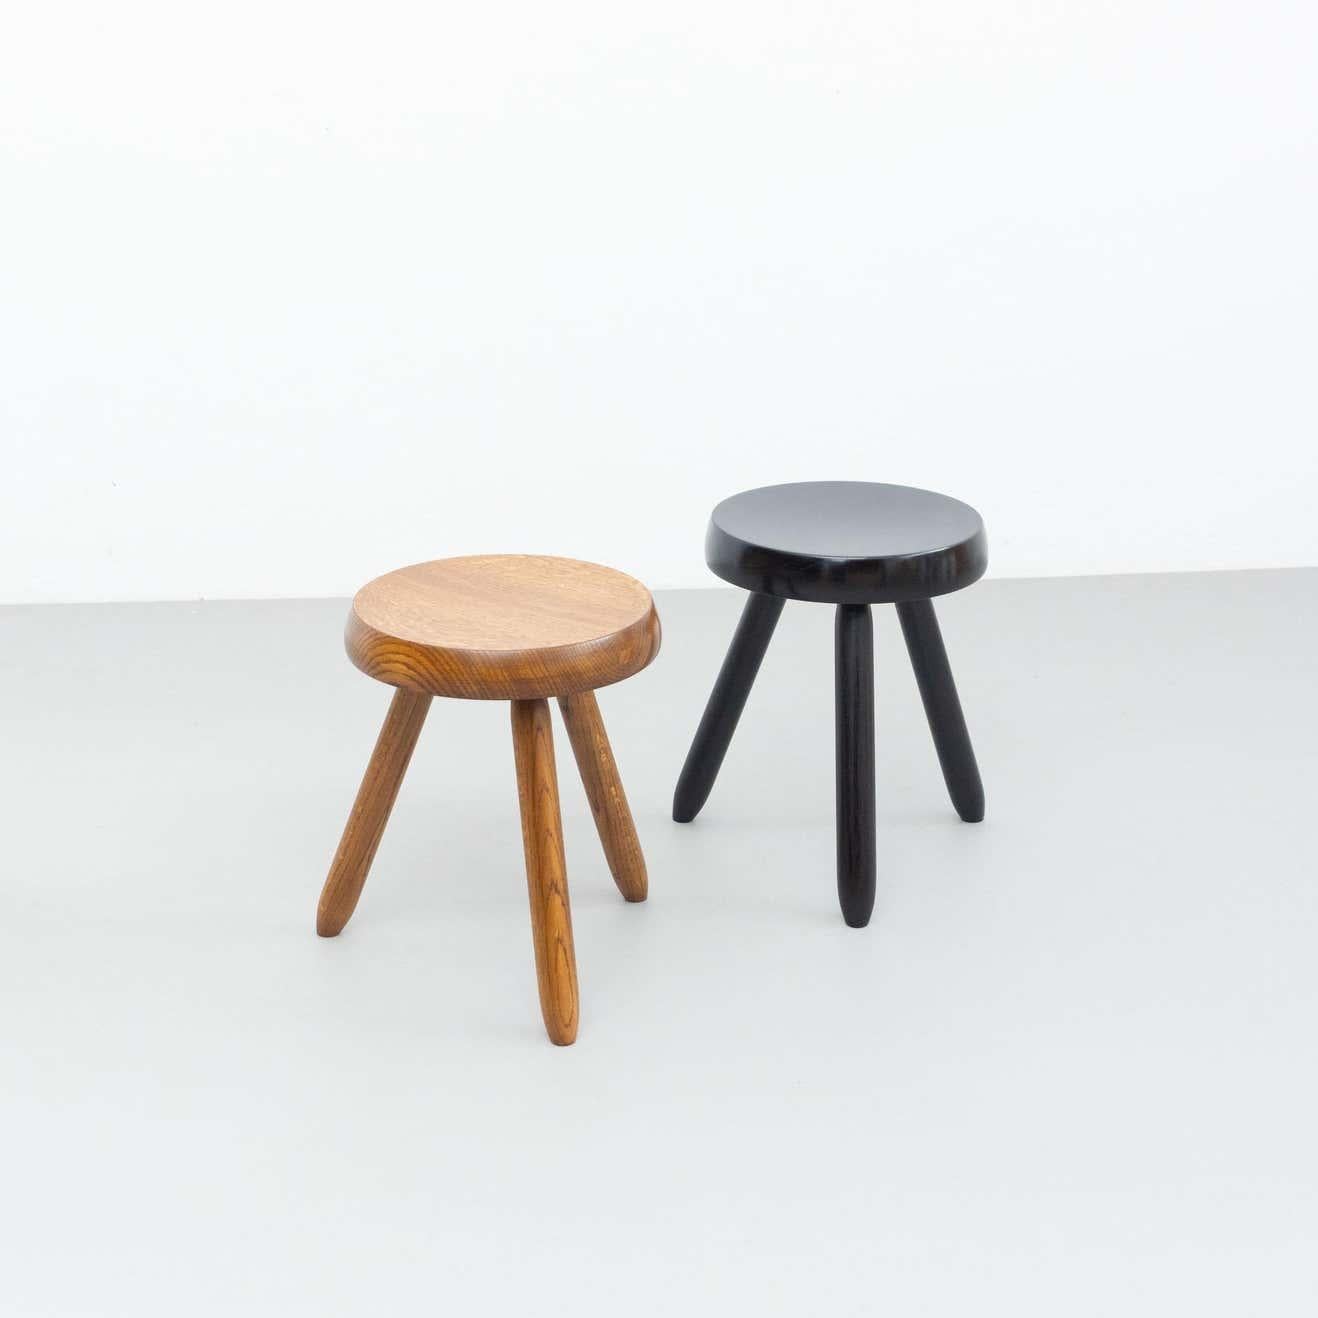 Stools designed in the style of Charlotte Perriand.
Made by unknown manufacturer.

In good original condition, preserving a beautiful patina, with minor wear consistent with age and use. 

Materials:
Wood

Dimensions:
30 D cm x 30 W cm x 40